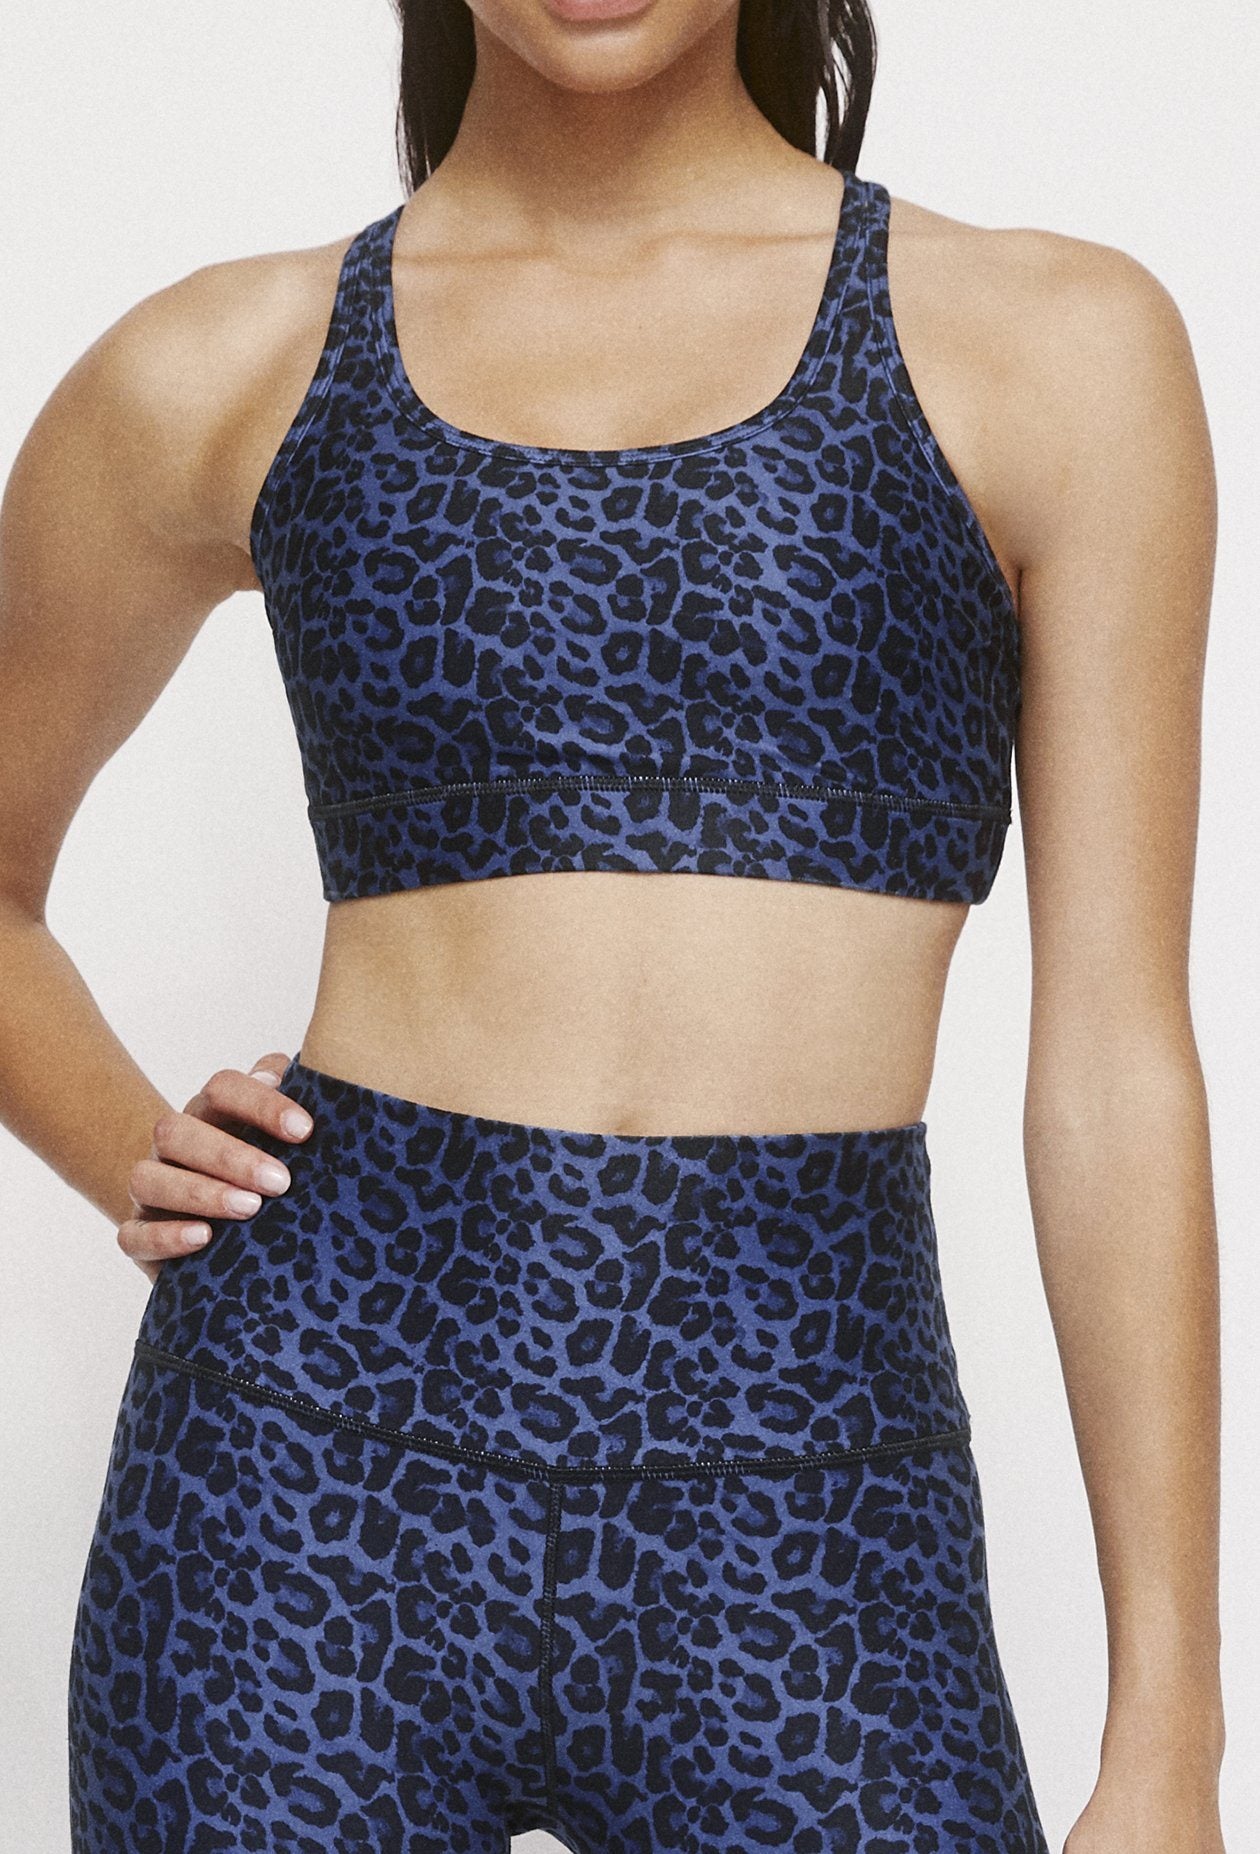 Wear It To Heart Natural Cheetah Strappy Bra on Sale